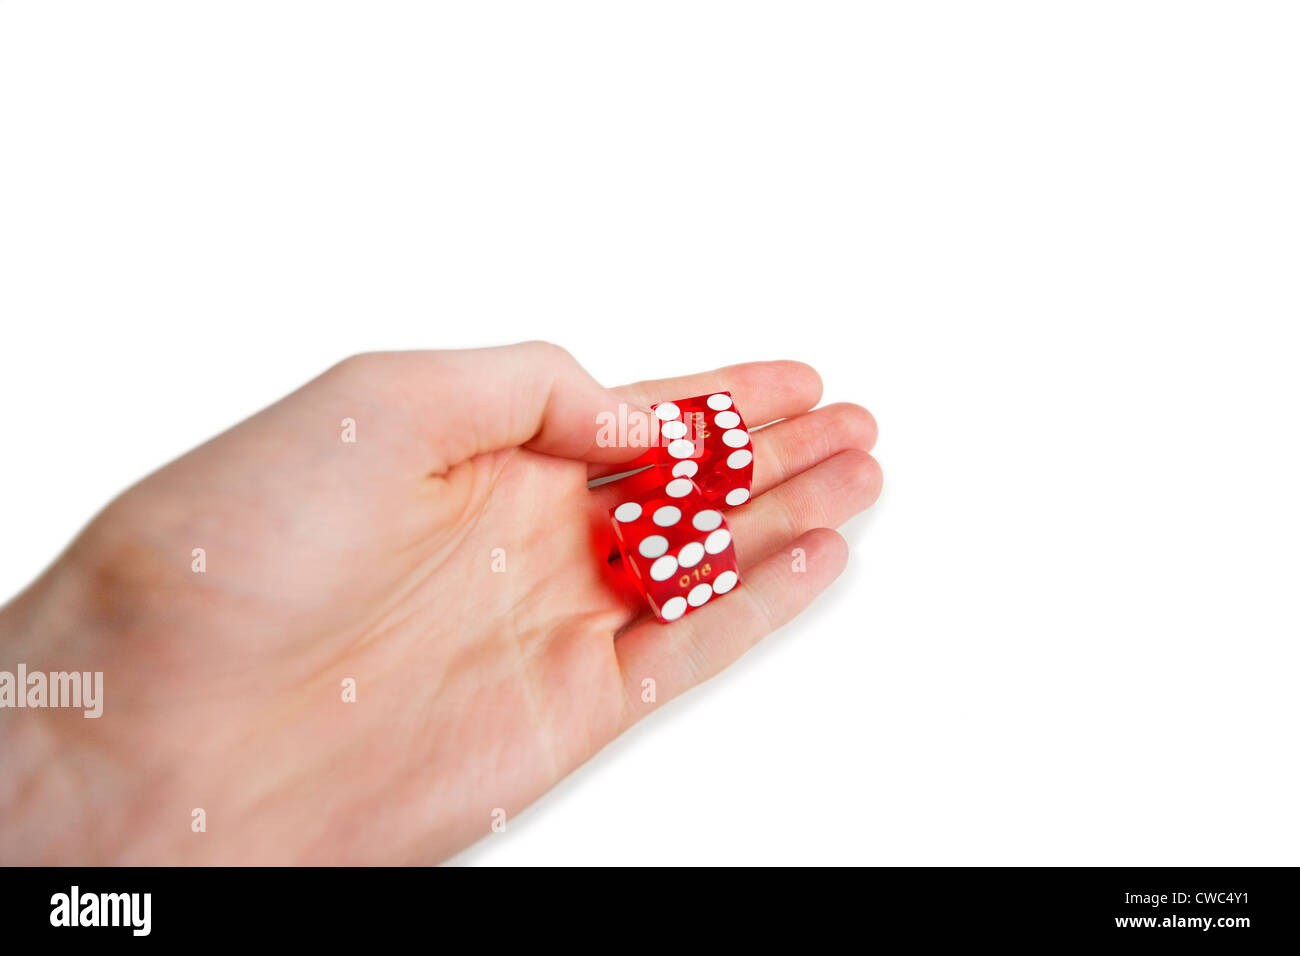 Cropped image of hands holding gambling cubes over white background Stock Photo